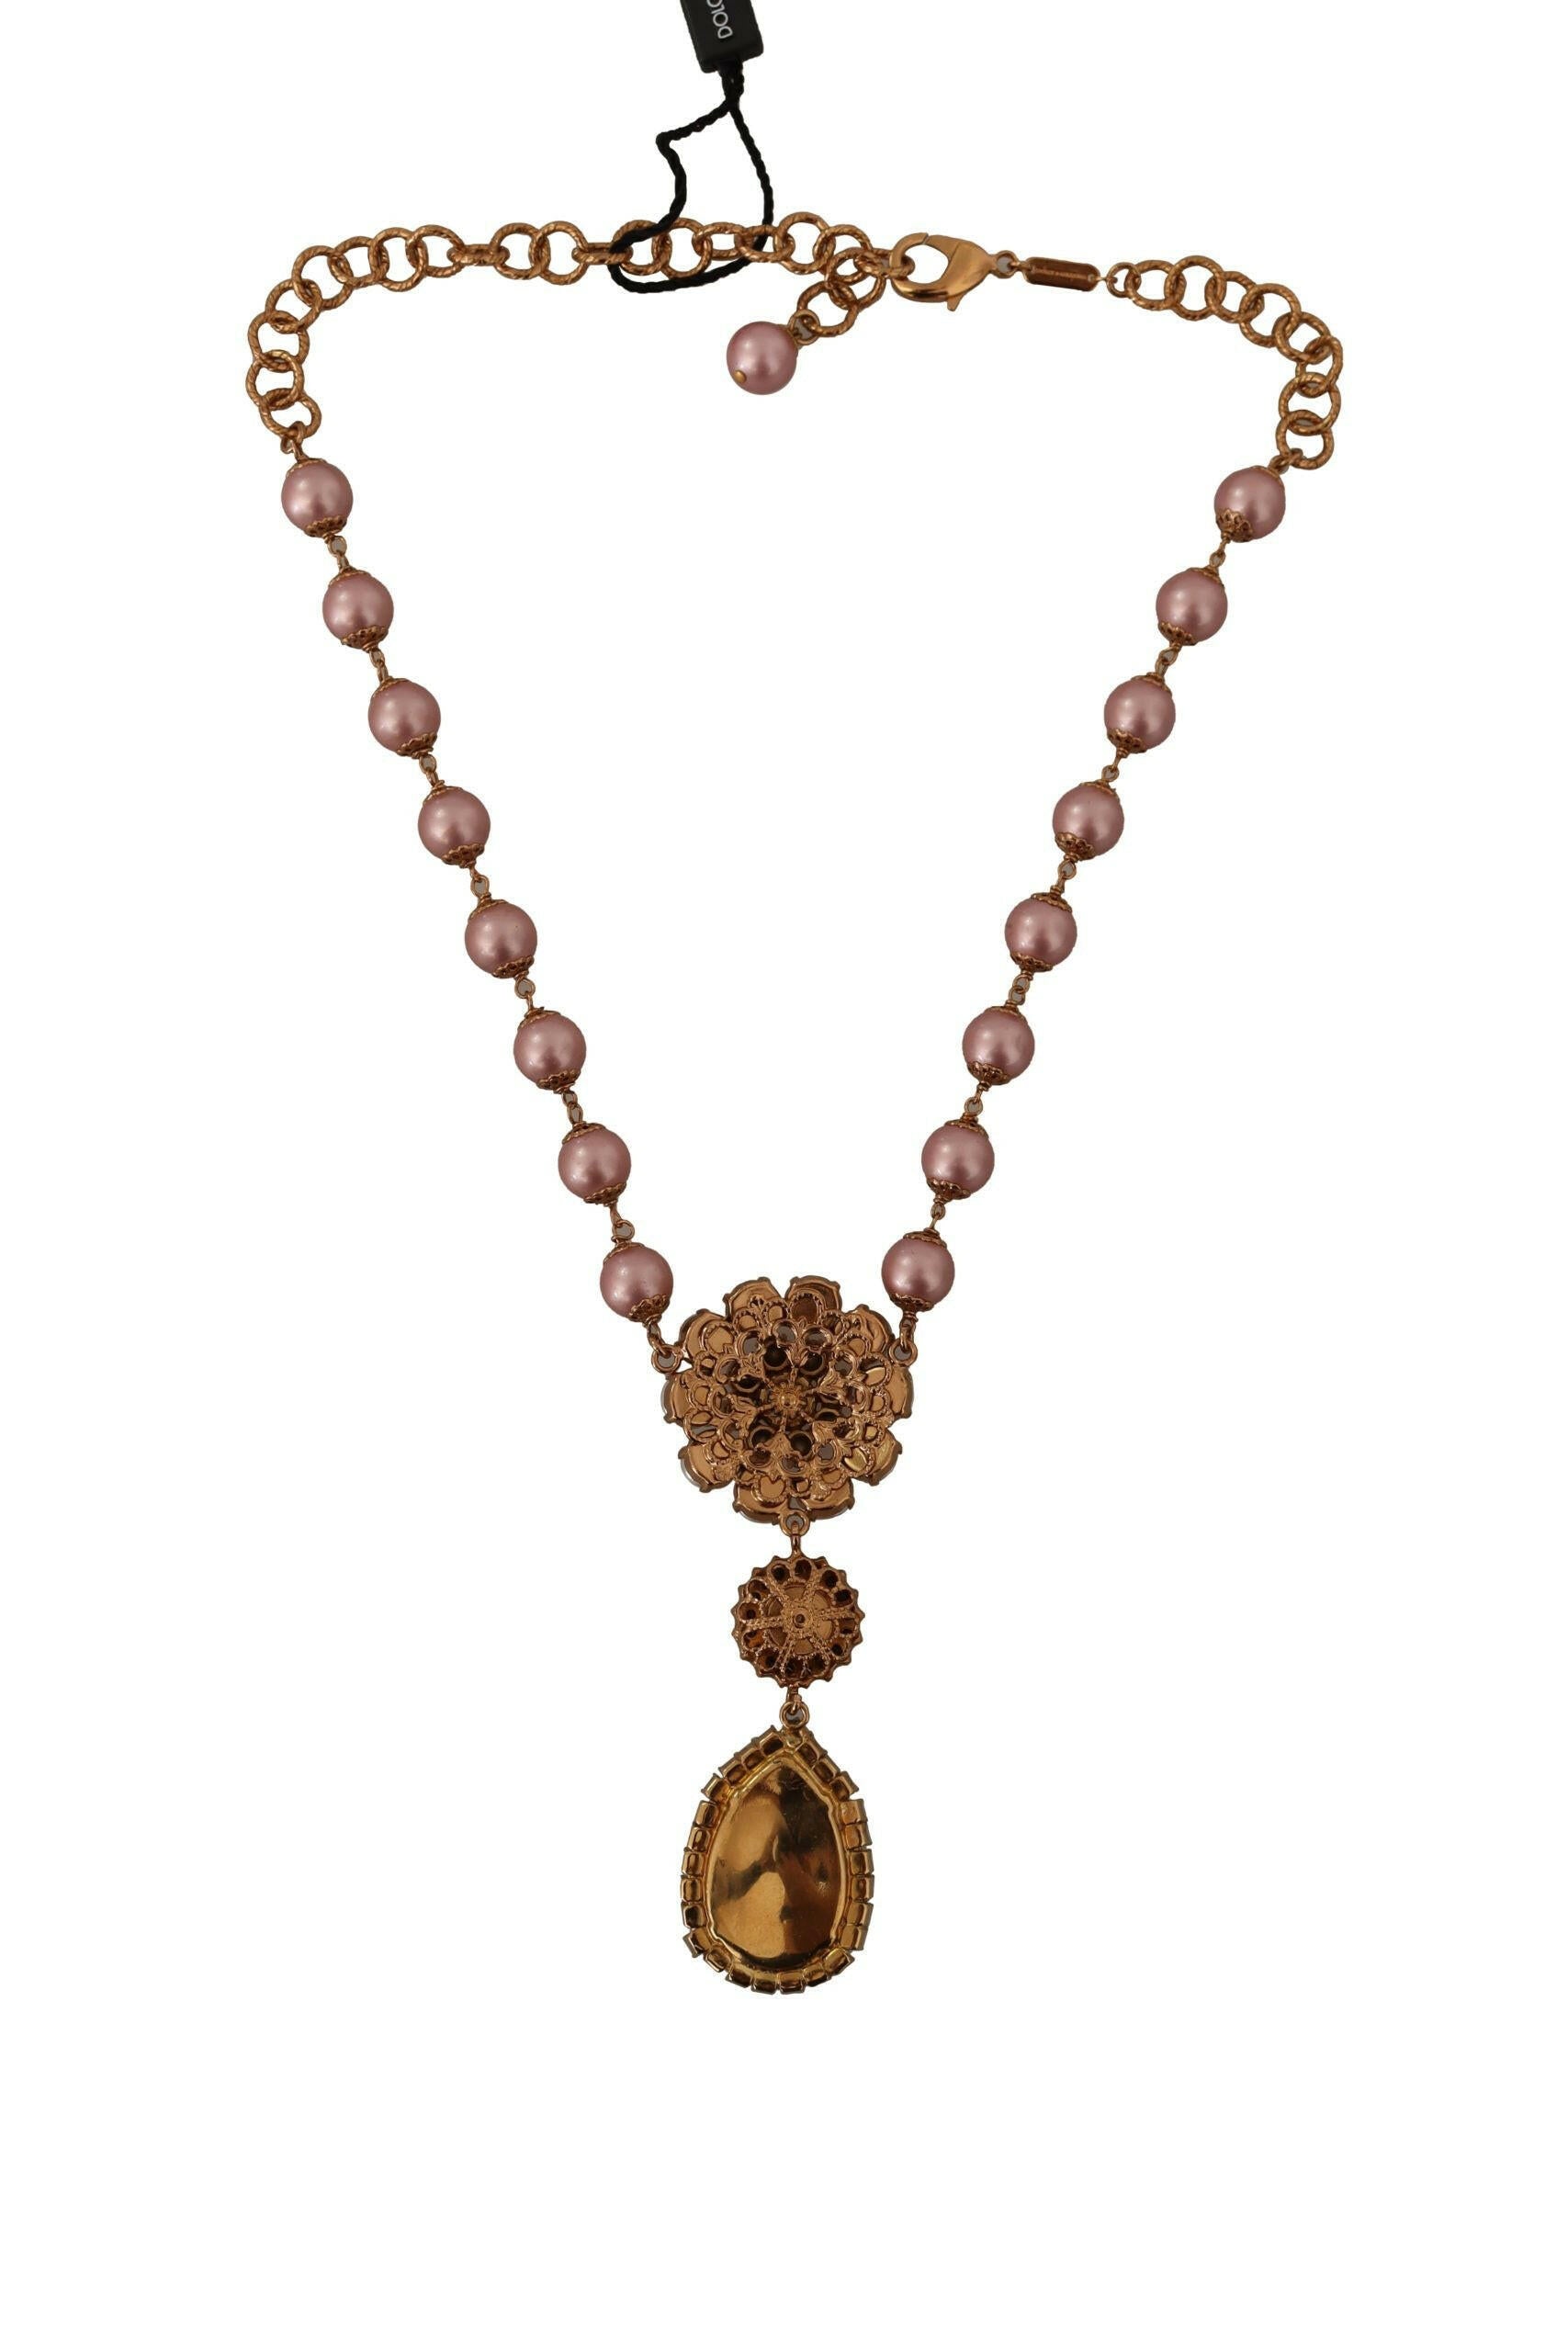 Dolce & Gabbana Gold Tone Brass Pink Beaded Pearls Crystal Pendant Necklace - GENUINE AUTHENTIC BRAND LLC  